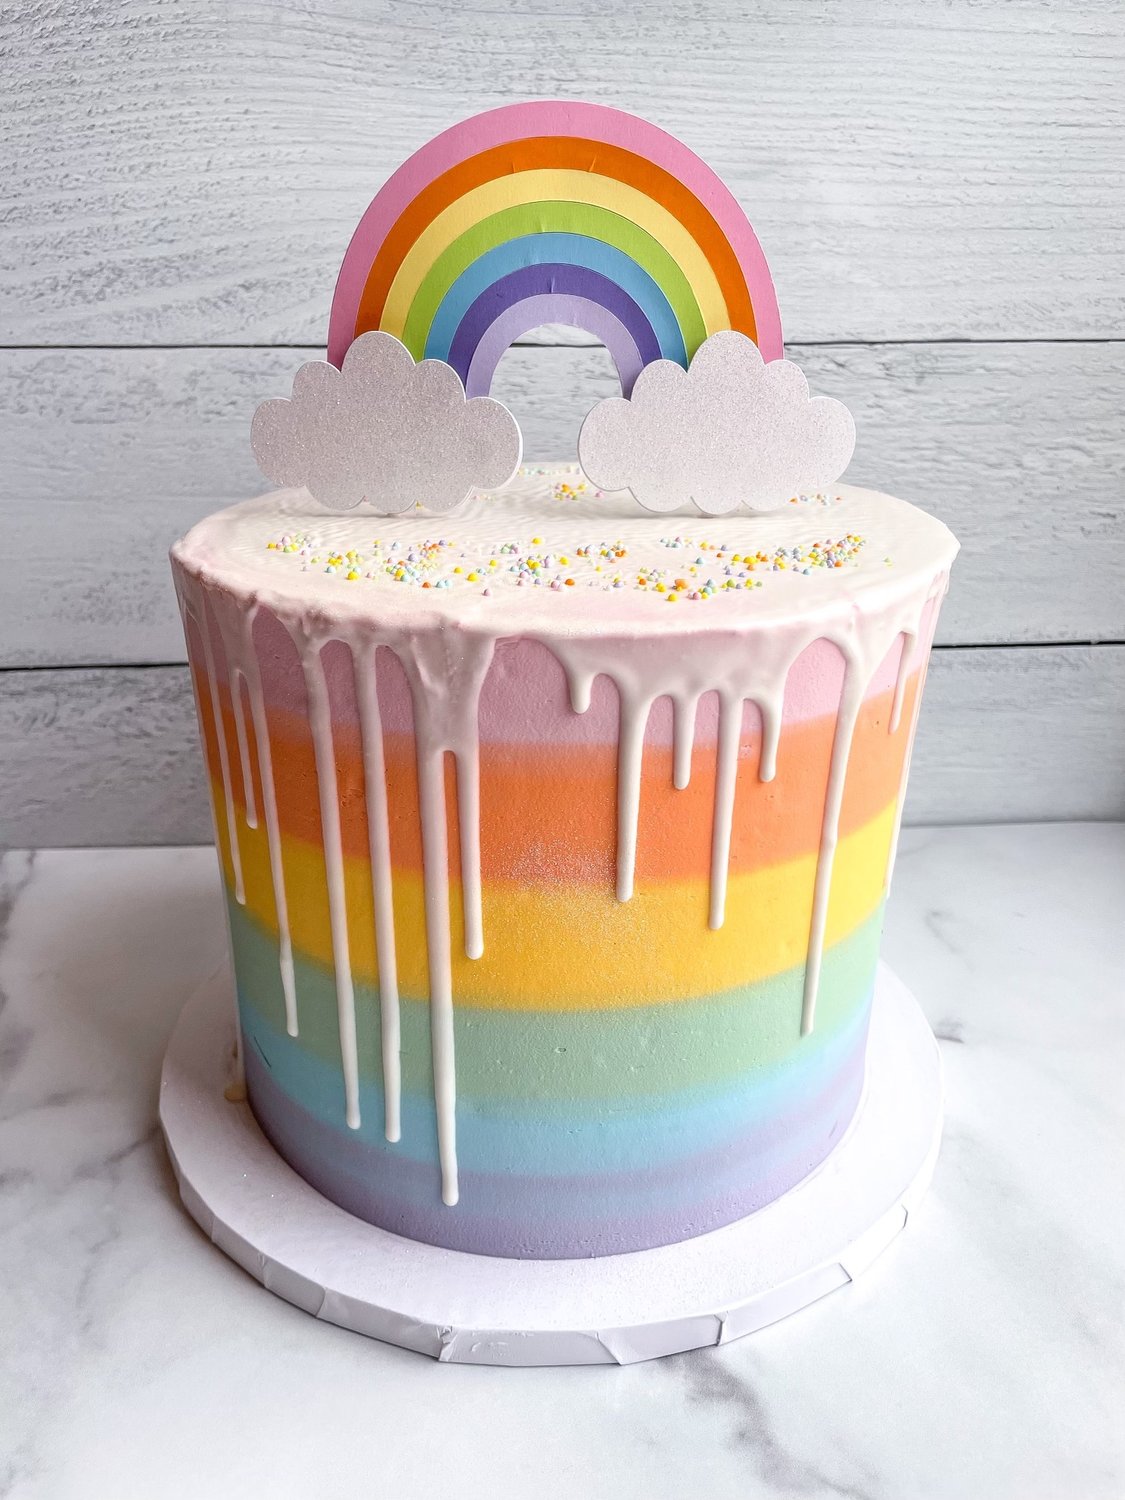 Wilson said this rainbow cake was one of her favorites to make.